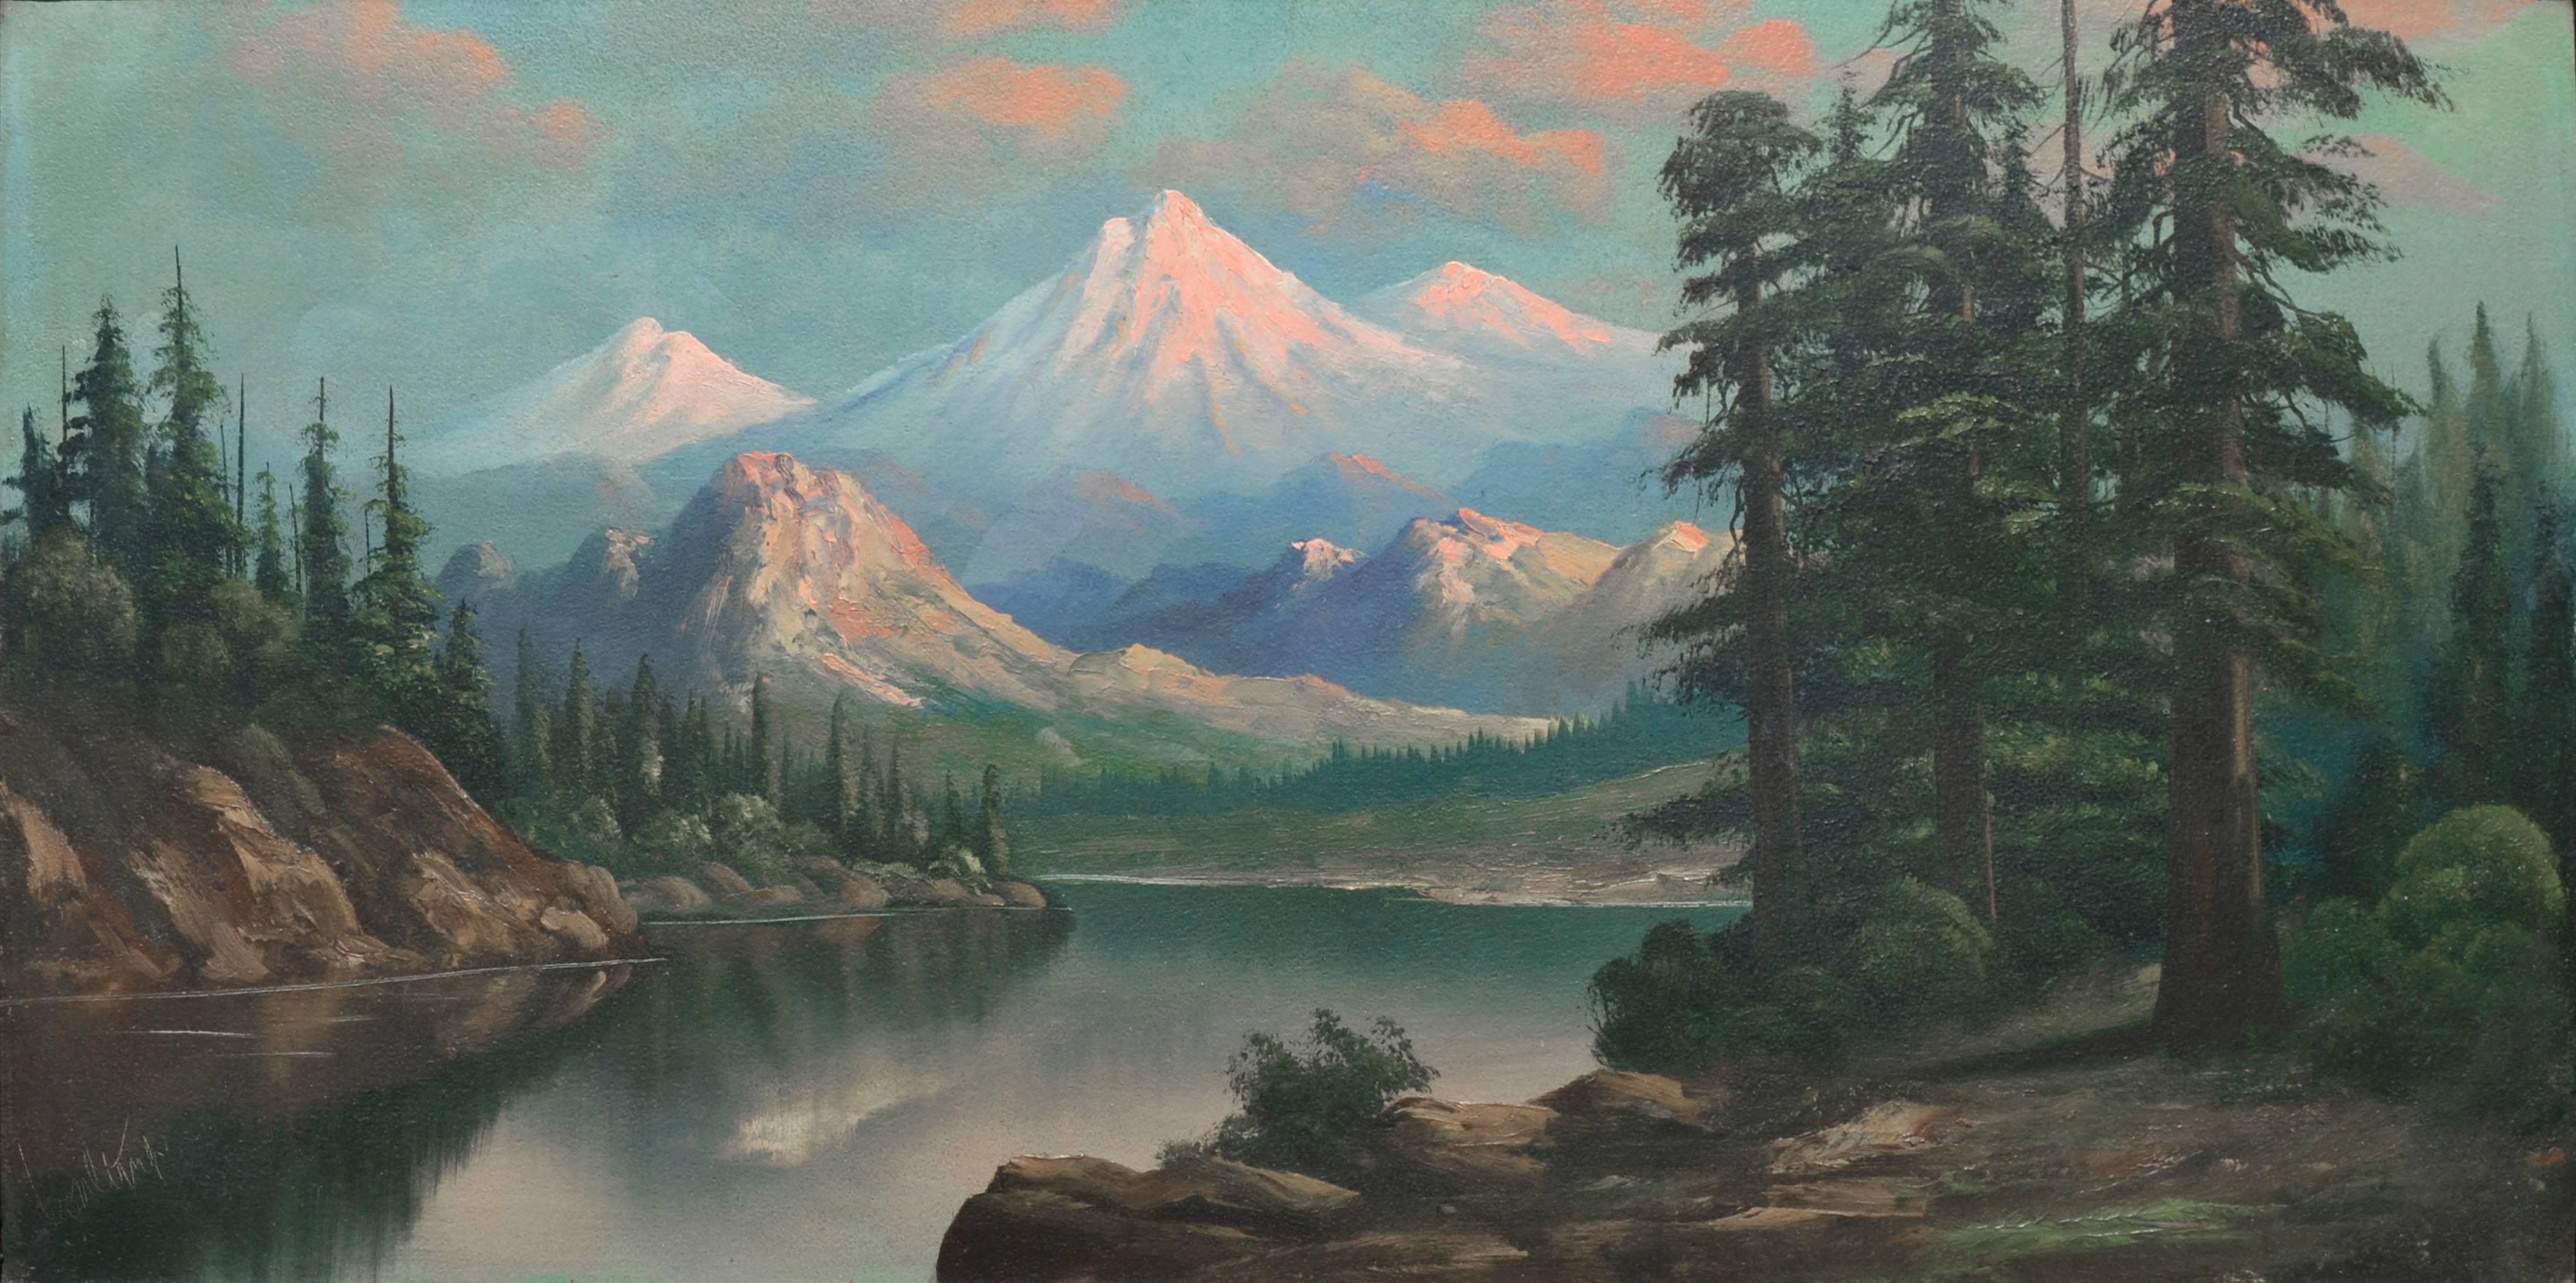 Snow Capped Mountains and Lake - Mt. Hood Oregon Landscape  - Painting by John Coultrup